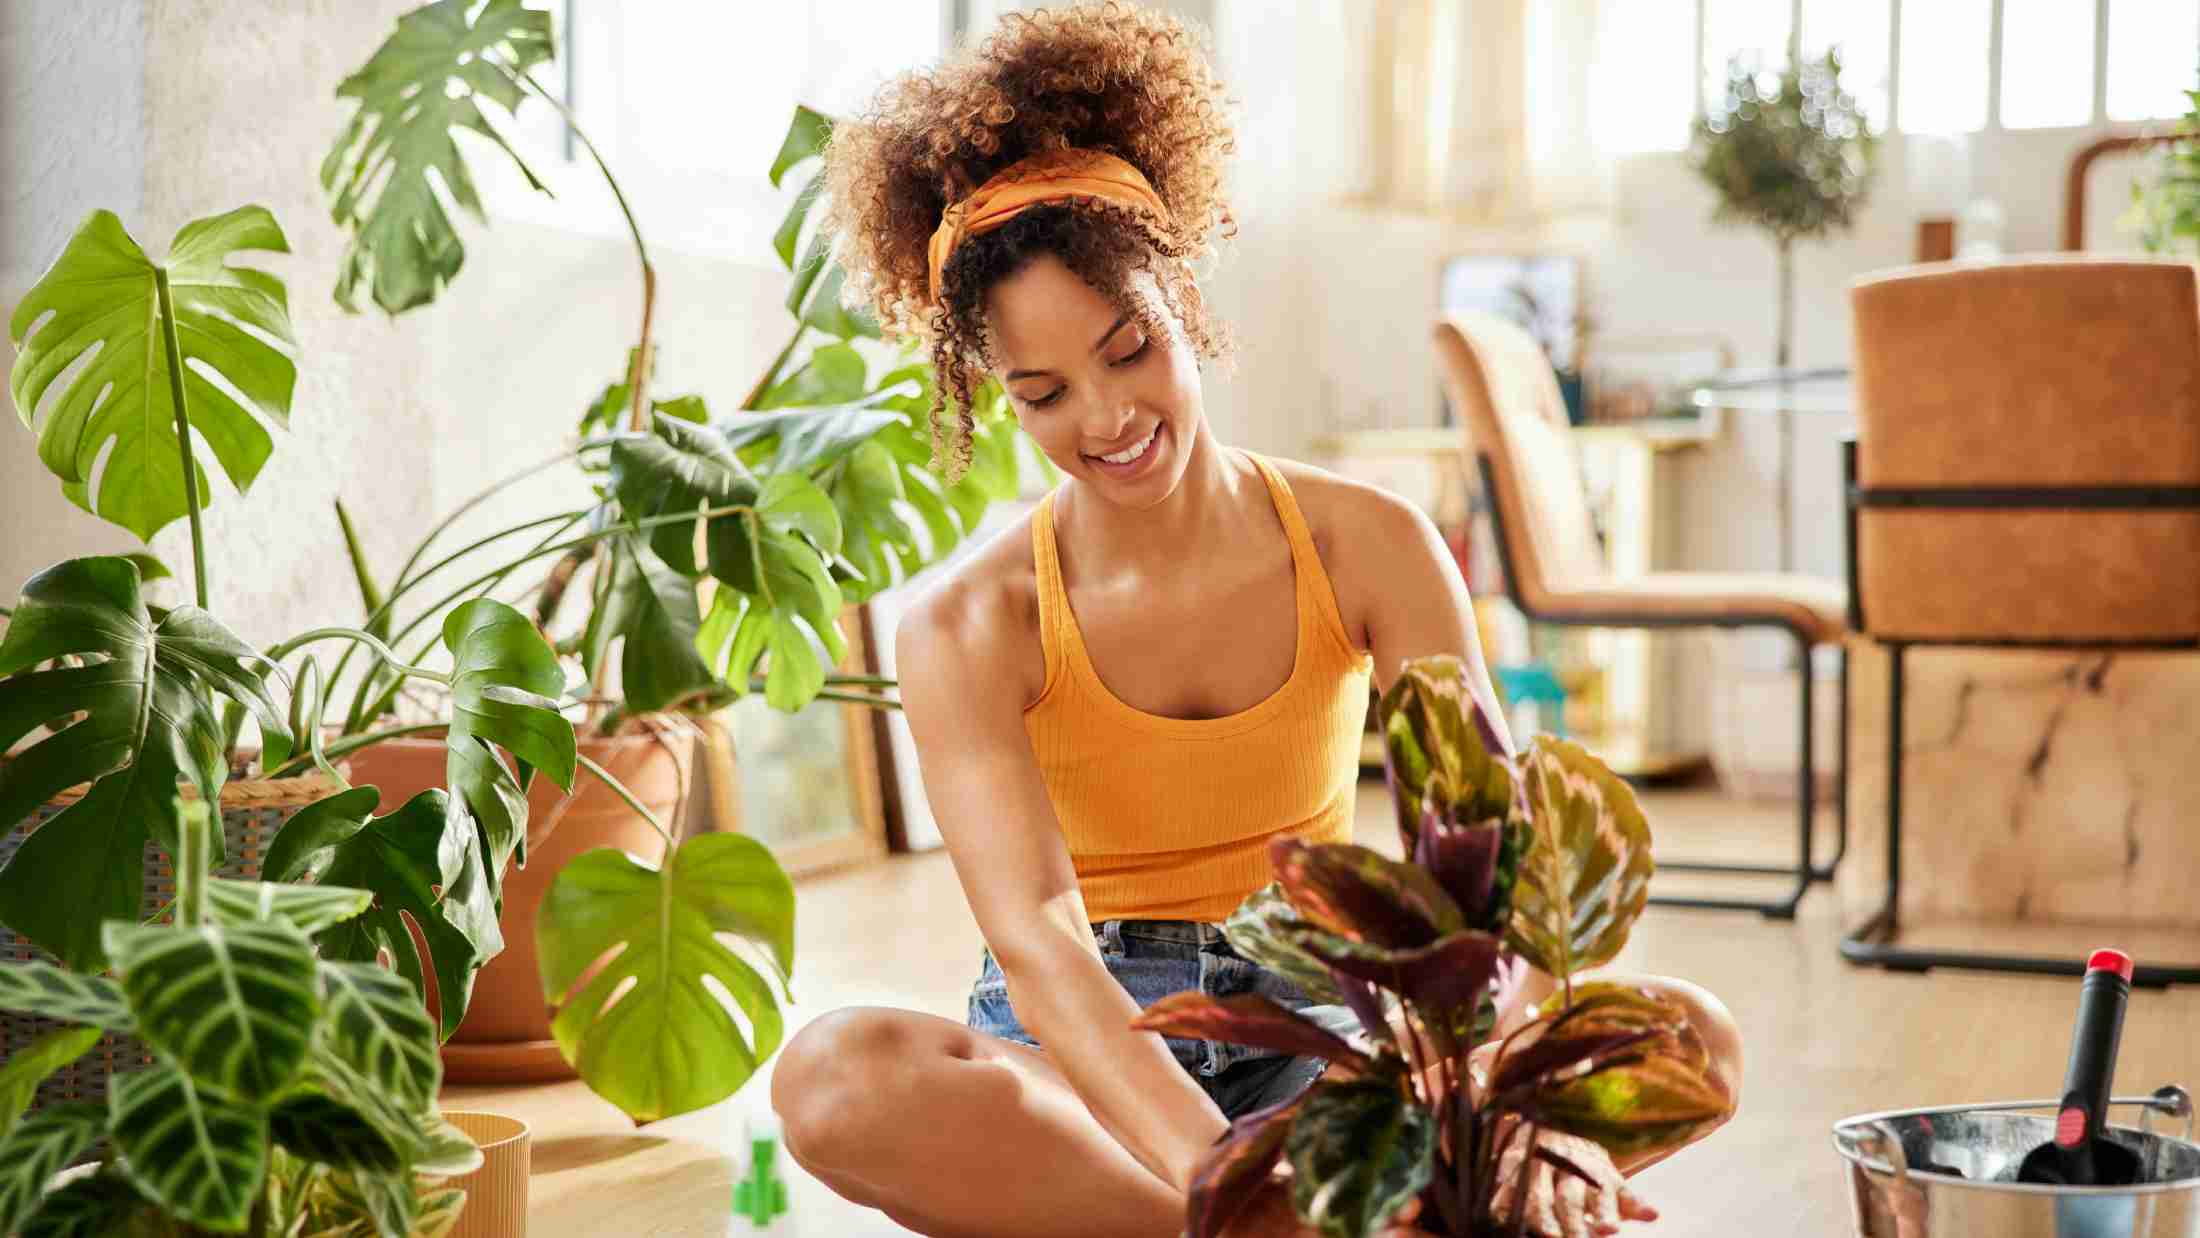 Smiling woman planting while slitting cross legged by potted plants